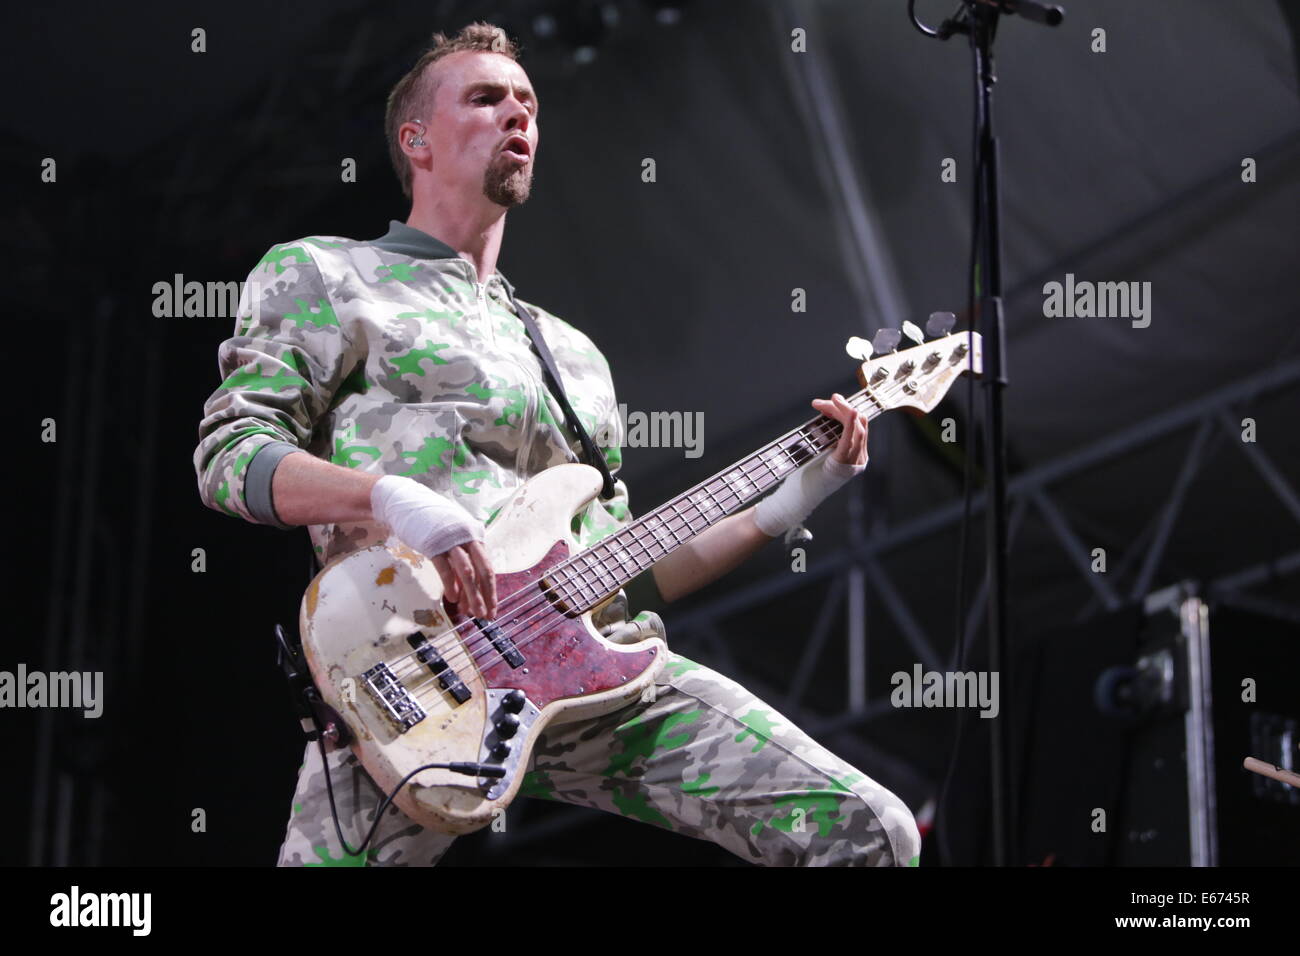 The bass player, Robert 'Bob' SchŸtze of MIA performs live on stage at the  Jazz and Joy festival 2014 in Worms. The "MIA" is a German rock/pop band.  Credit: Michael Debets/Pacific Press/Alamy